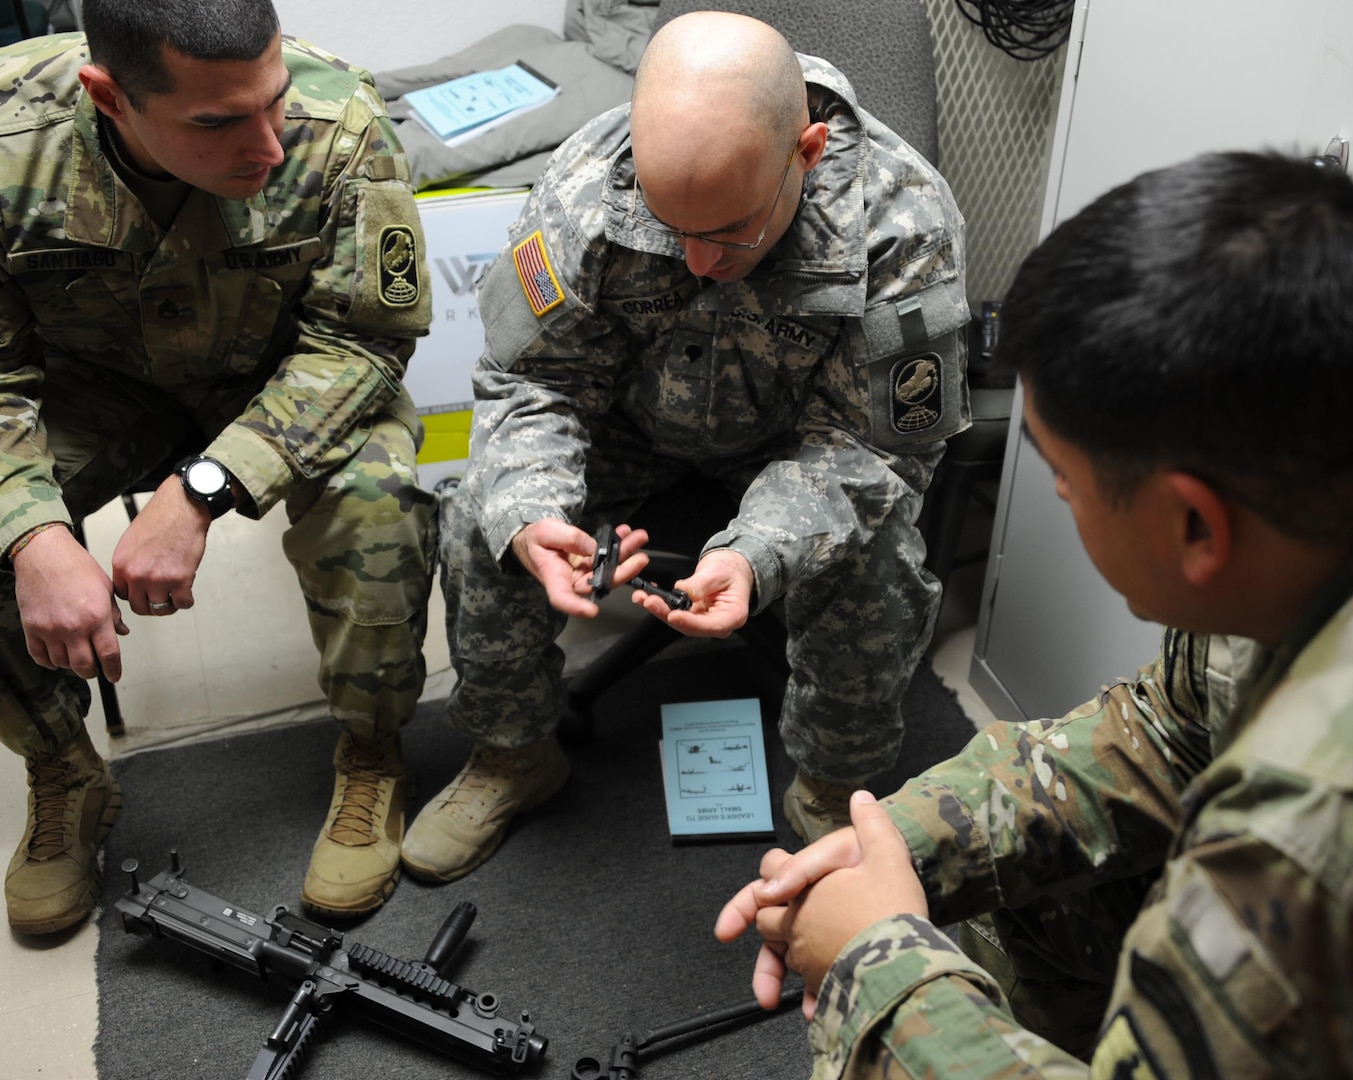 Sgt. 1st Class Richard Stanley, National Guard Marksmanship Training Center small arms trainer, instructs two students on the mechanics of the M249 Squad Automatic Weapon during a Small Arms Weapons Expert course held at Fort Greely, Alaska, in December 2015.